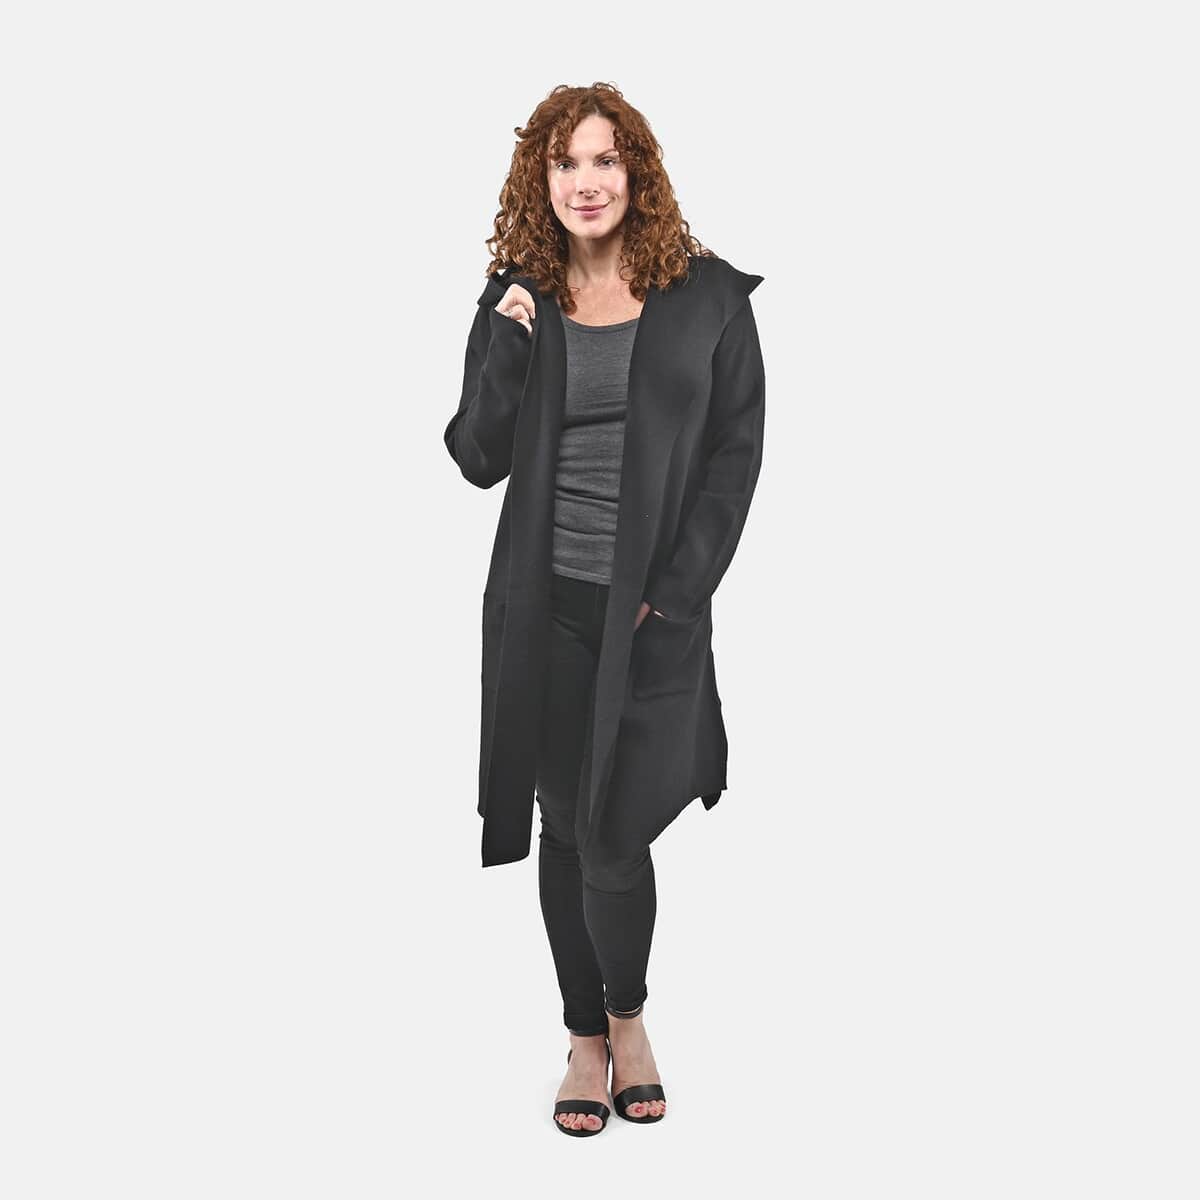 Badgley Mischka Black Cardigan Sweater with Hood - S (Ships in 8-10 Business Days) image number 0